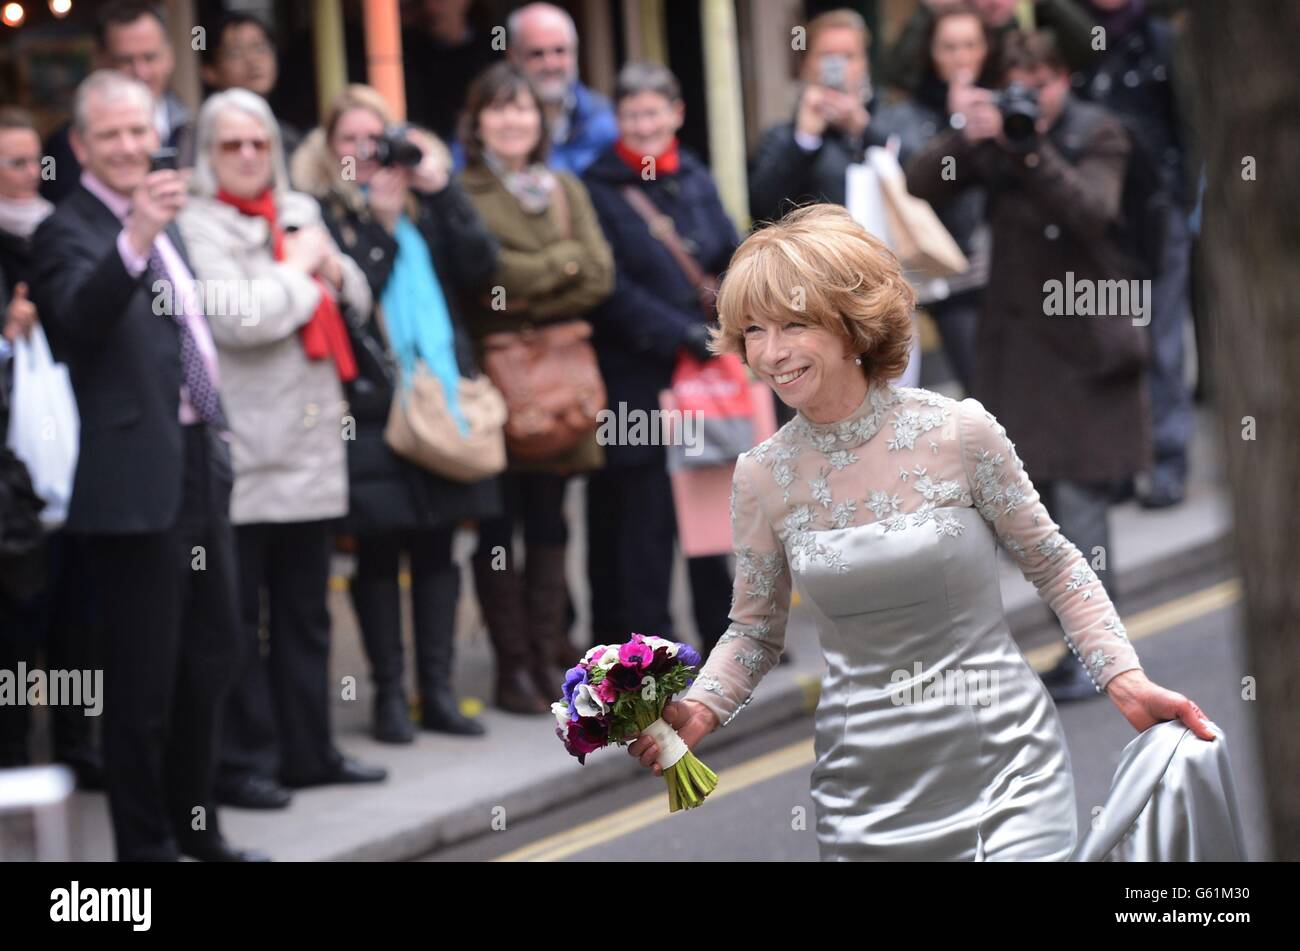 Coronation Street actress Helen Worth, who plays Gail Platt in the popular television soap opera, arrives at St James Church in London for her wedding to Trevor Dawson. Stock Photo